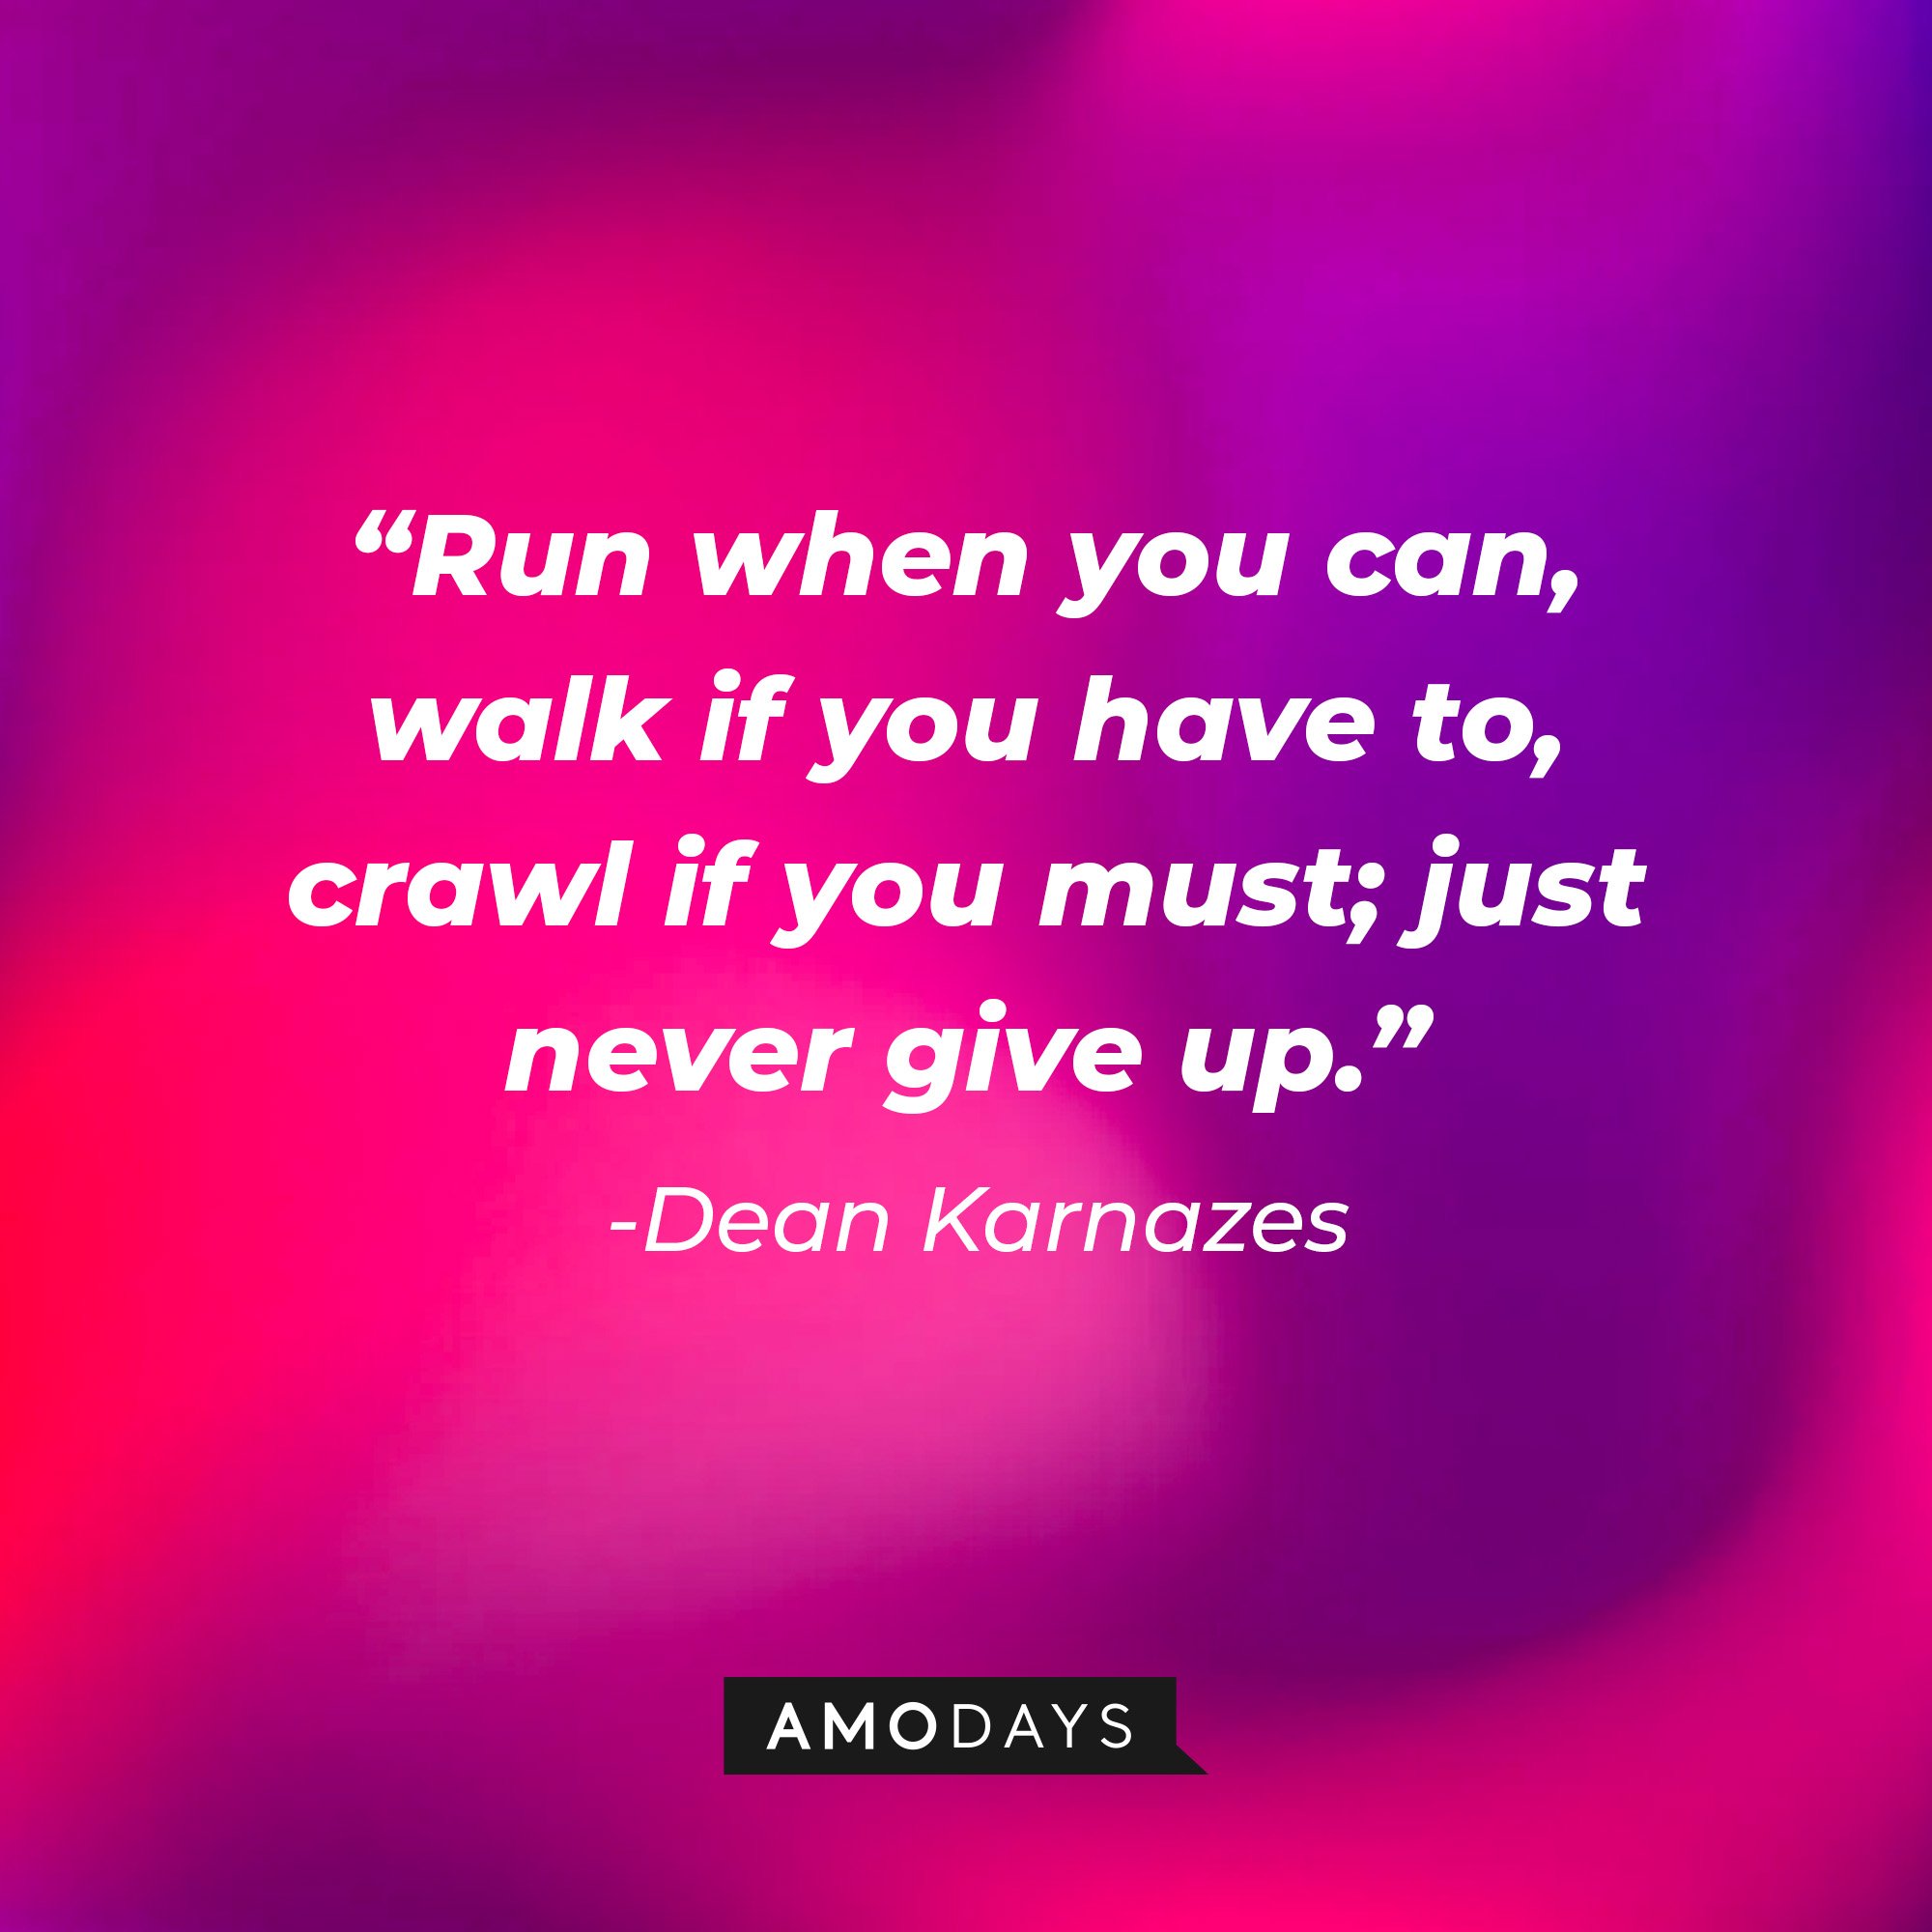  Dean Karnazes's quote: “Run when you can, walk if you have to, crawl if you must; just never give up.” | Image: AmoDays